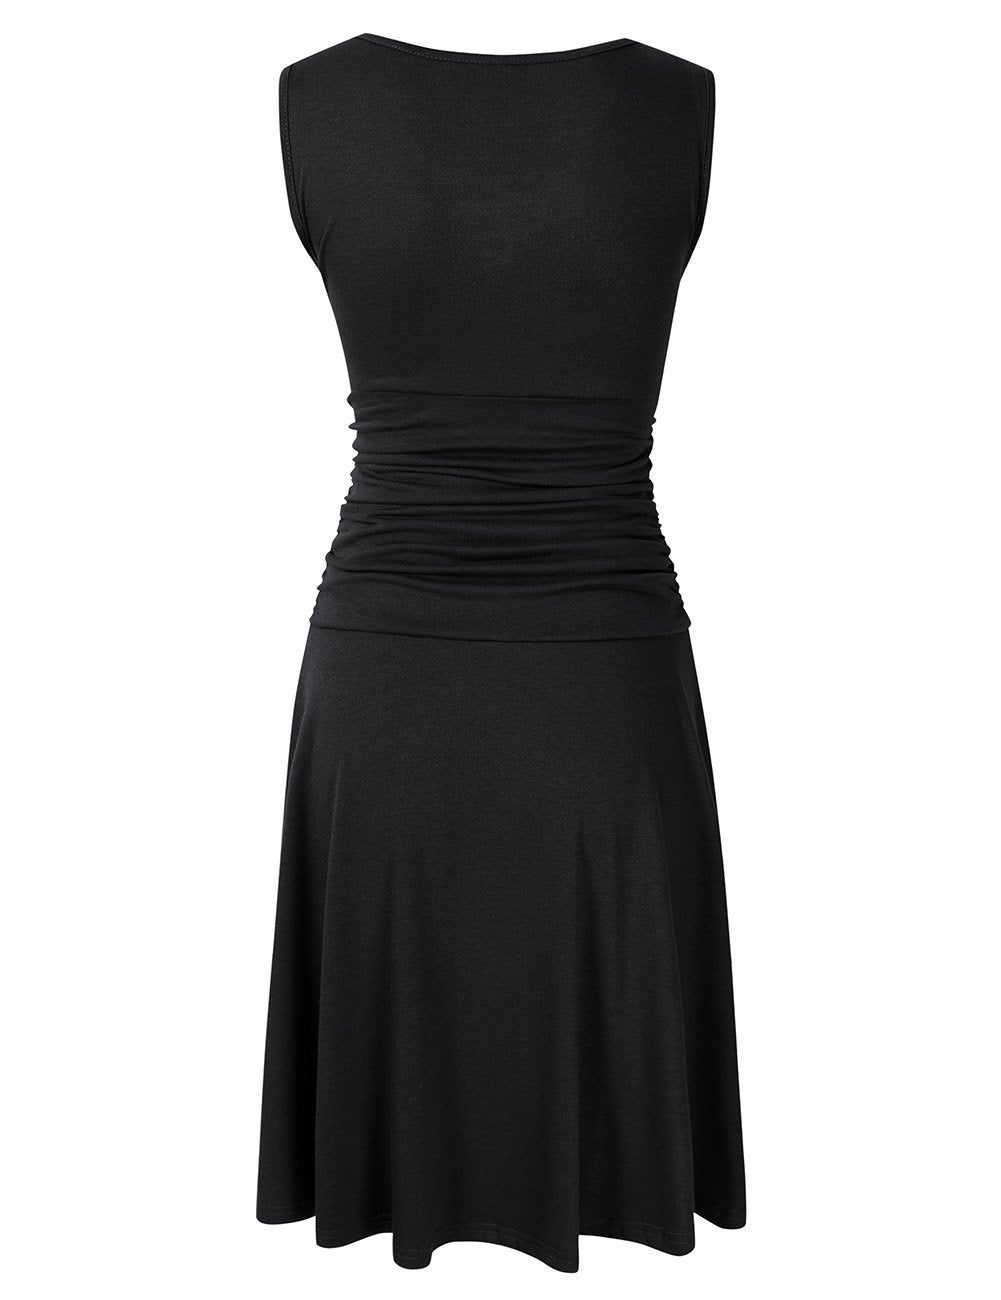 Women V Neck Sleeveless Crossover Wrap Ruched Waist Slimming Swing Cocktail Dress